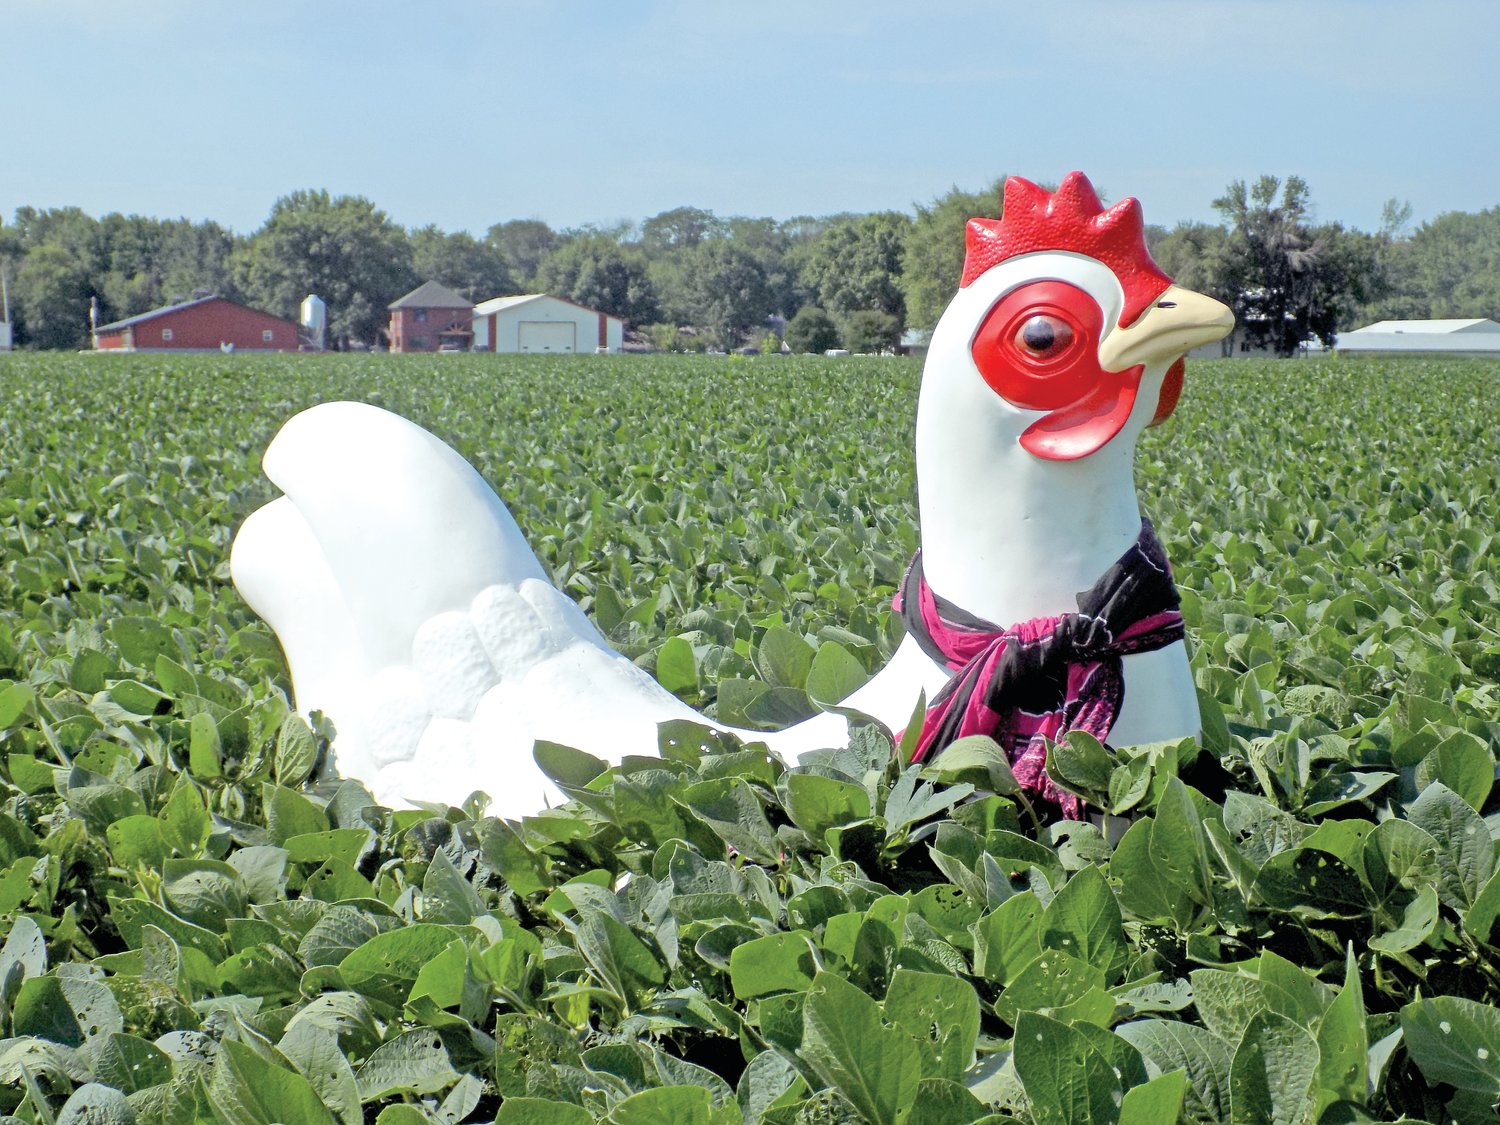 Deep in July’s soybean crop, a white chicken watches traffic along Hwy 22.